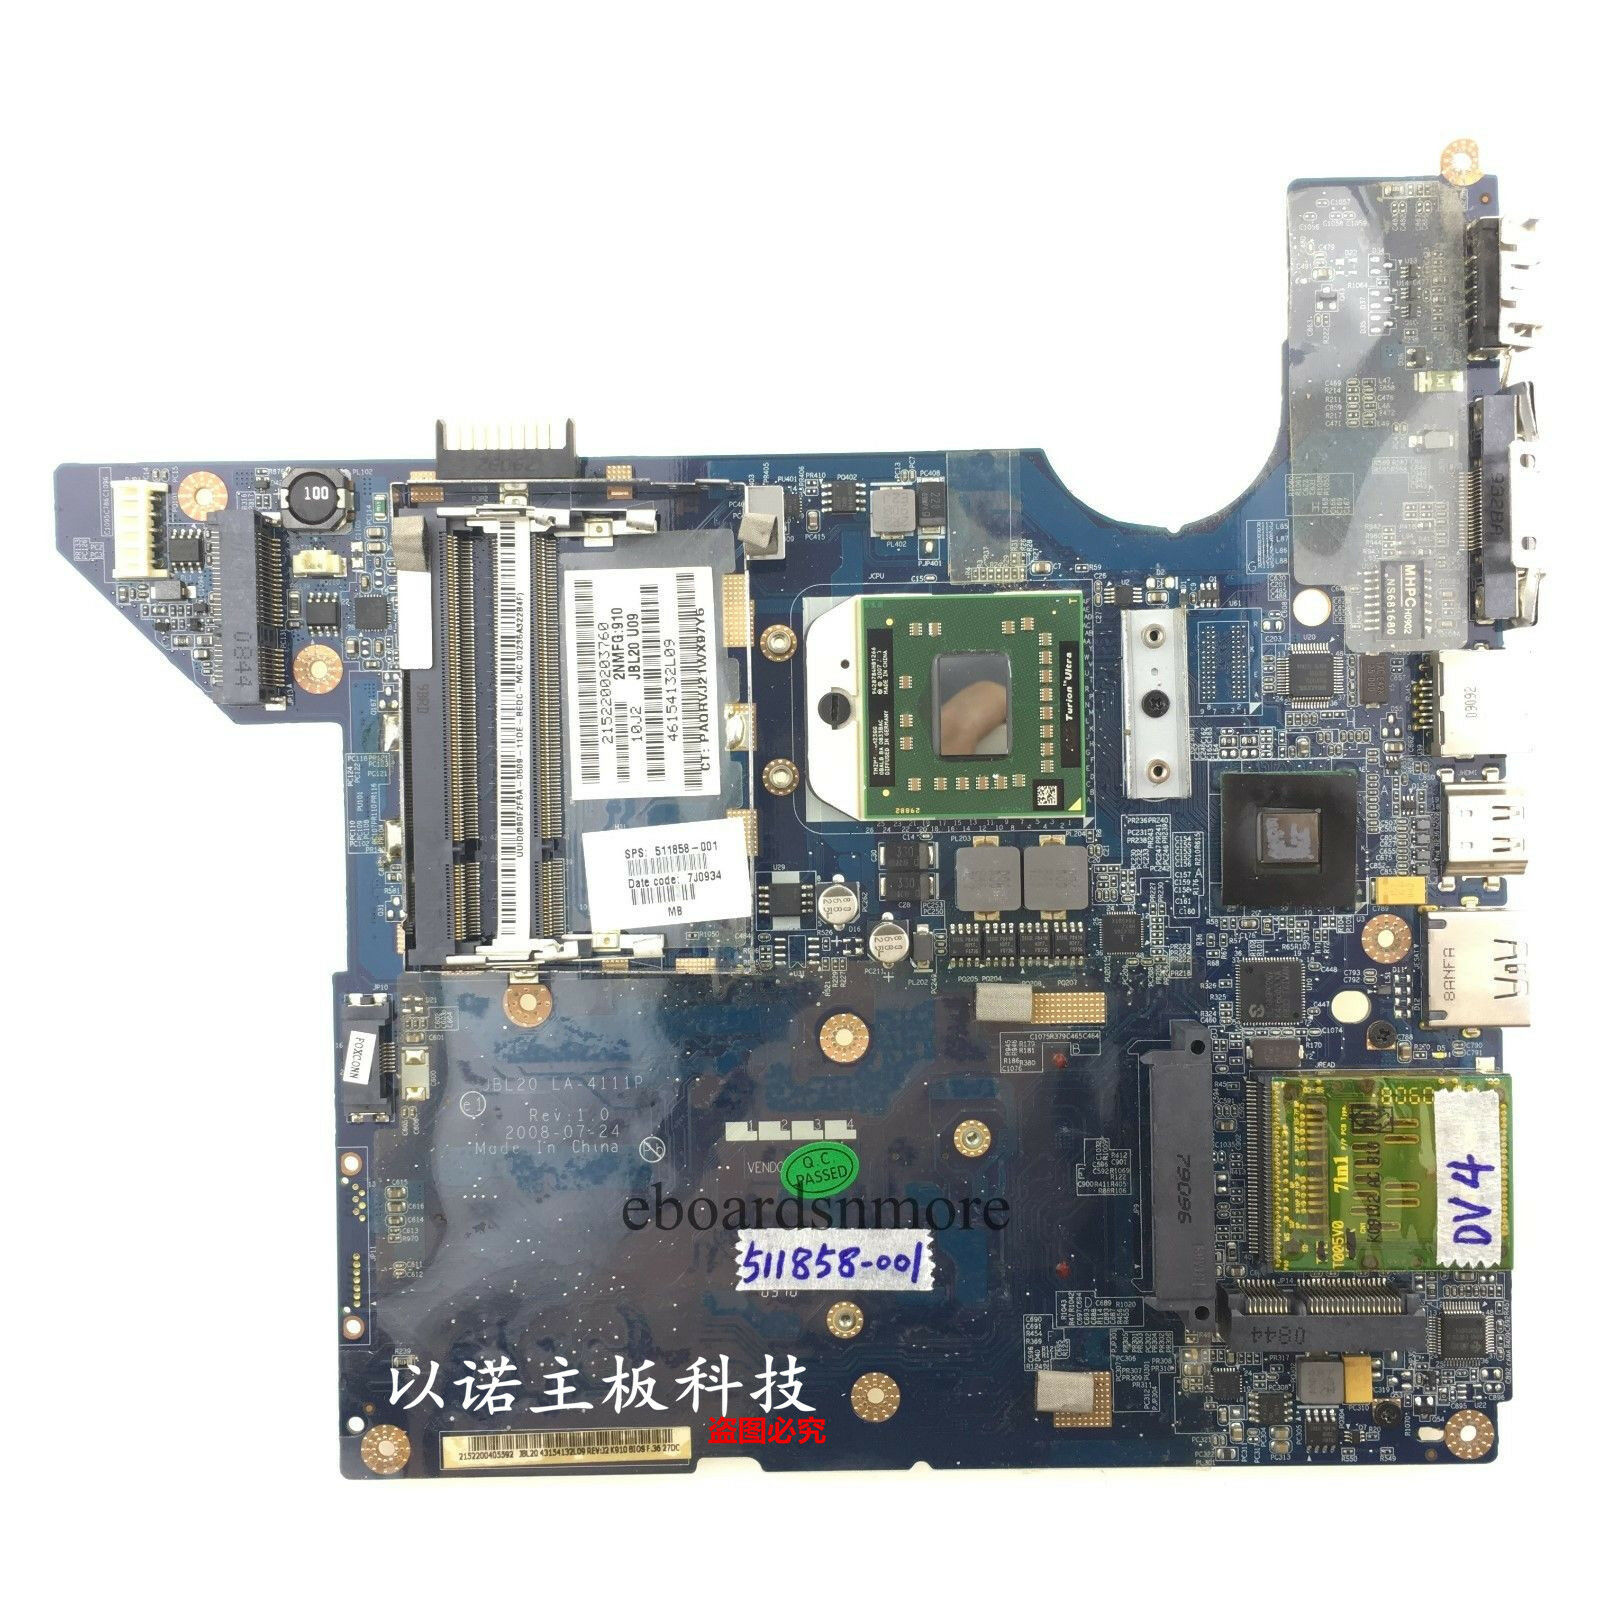 511858-001 for HP DV4 DV4-1000 series AMD Laptop motherboard LA-4111P,Grade A Compatible CPU Brand: AMD Feat